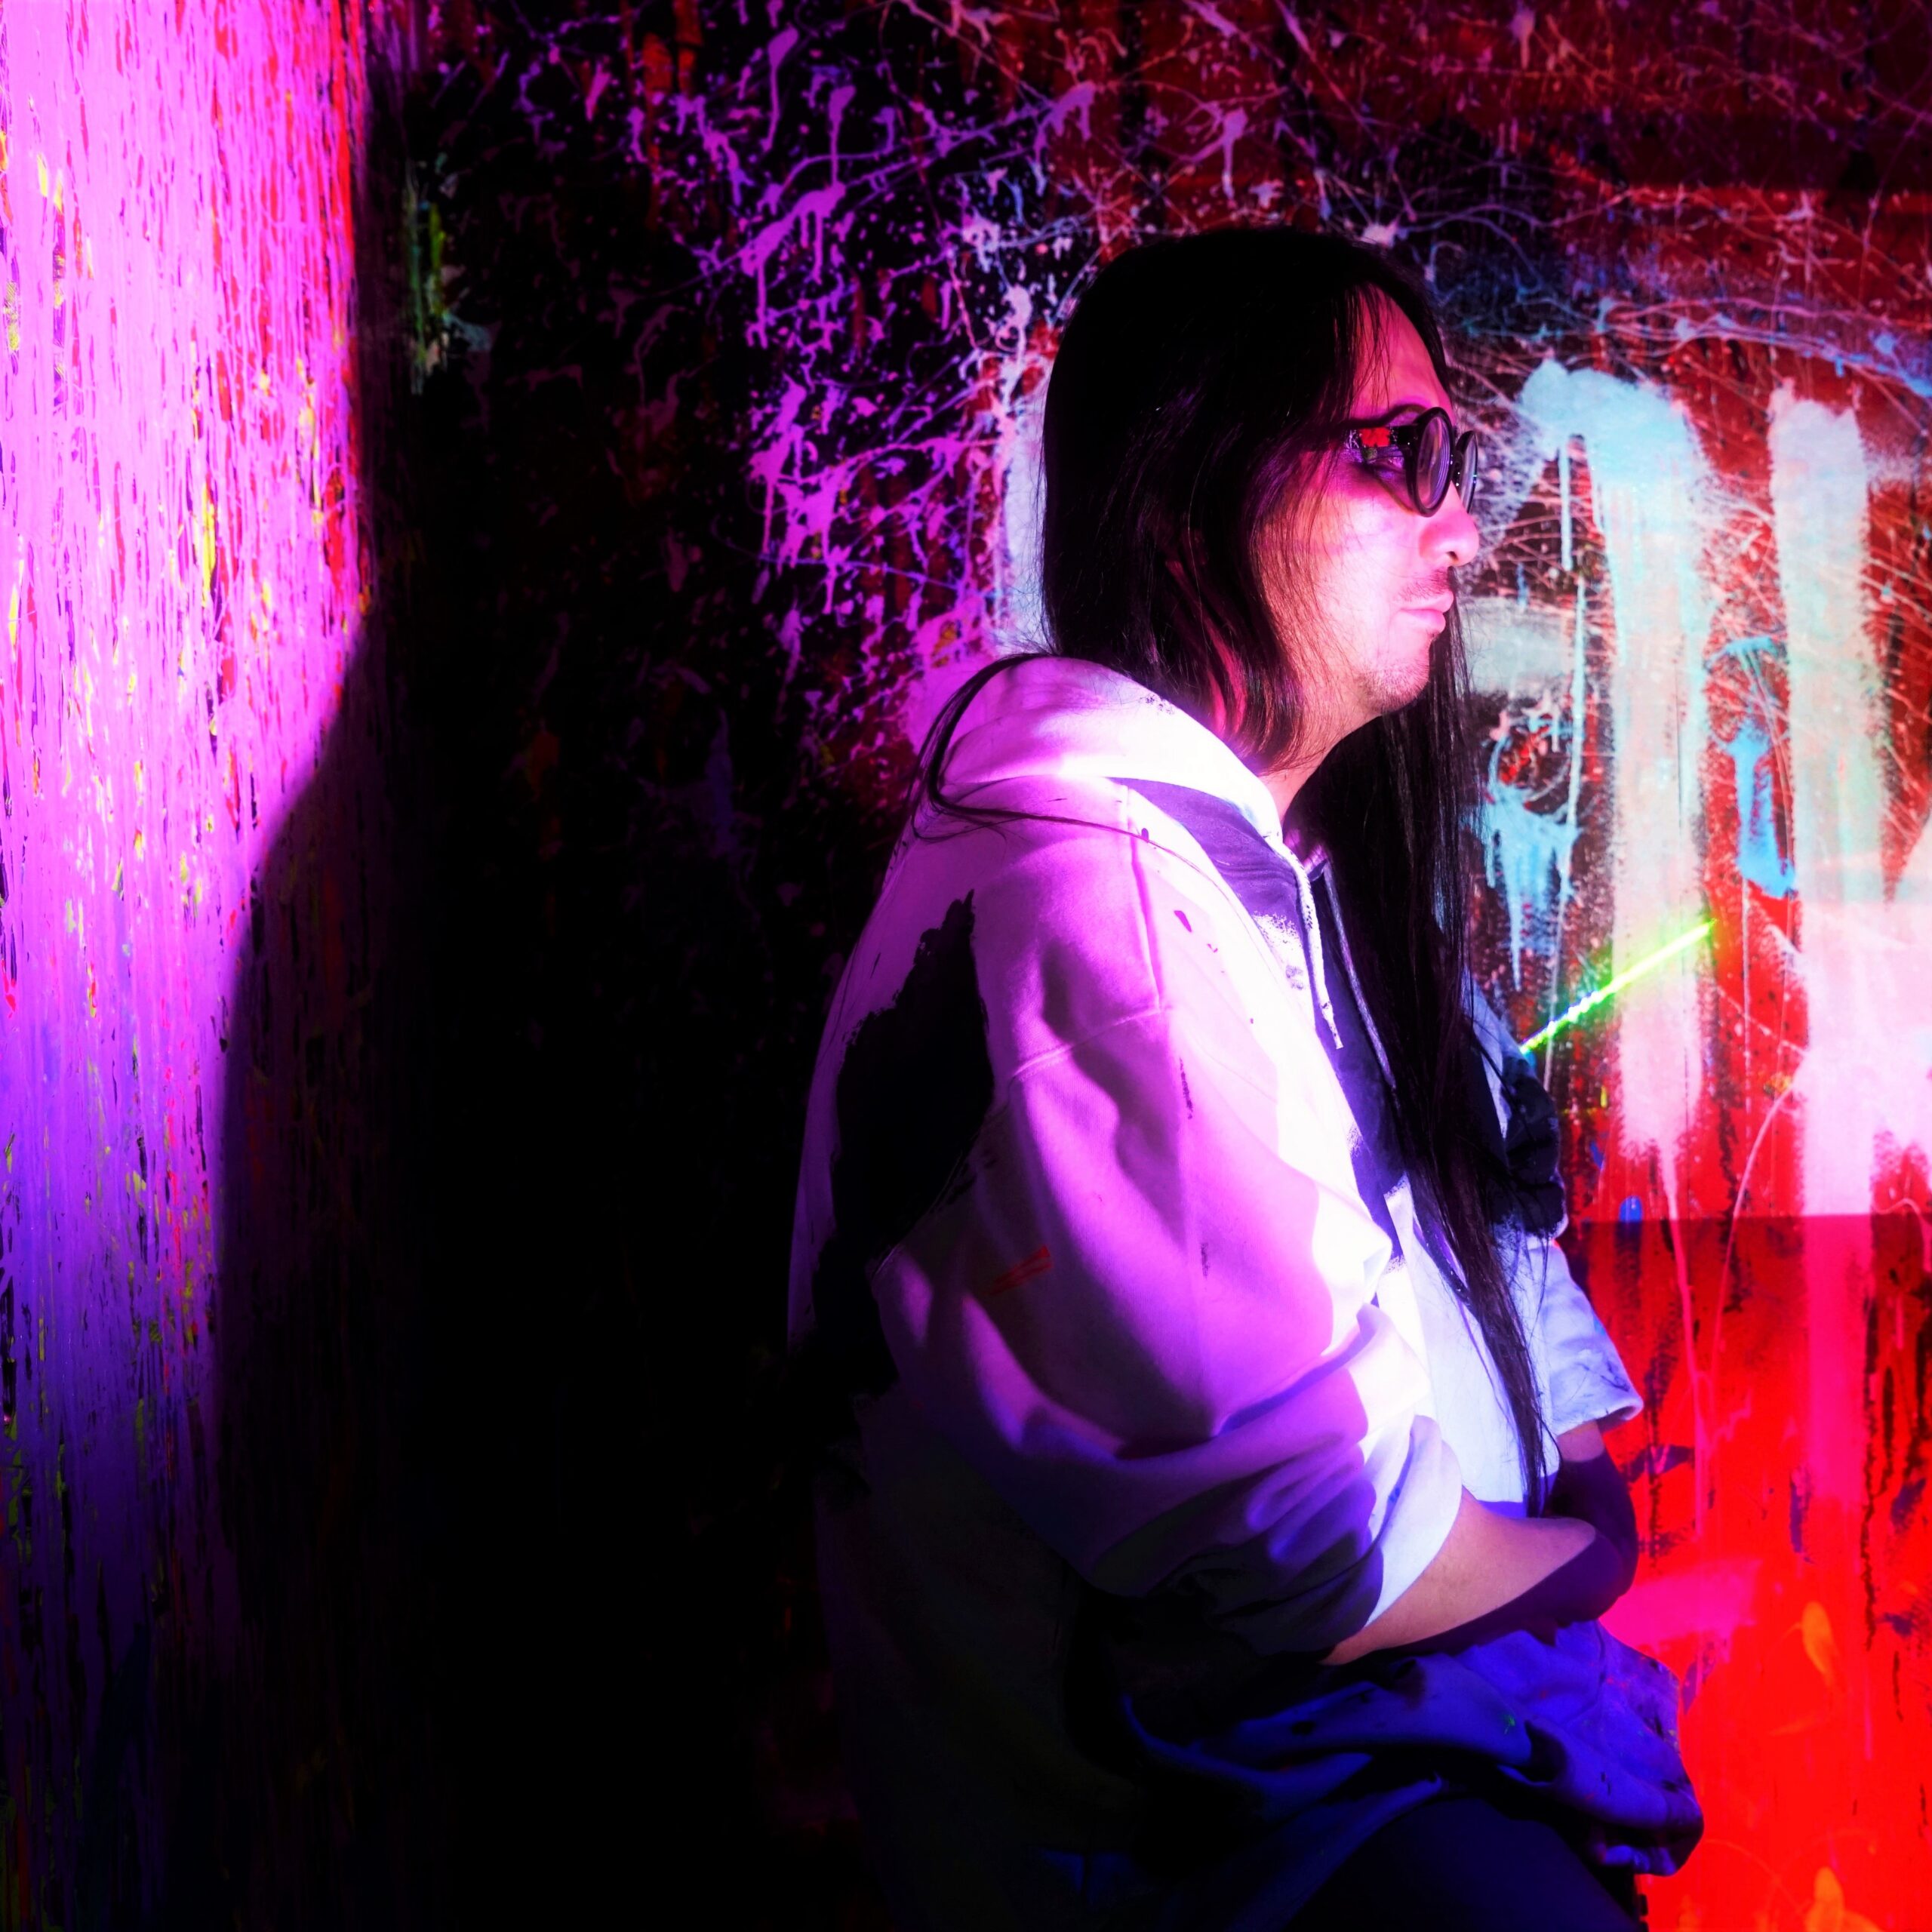 A colourful image of a person with long black hair and glasses facing sideways infront of graffiti coloured walls